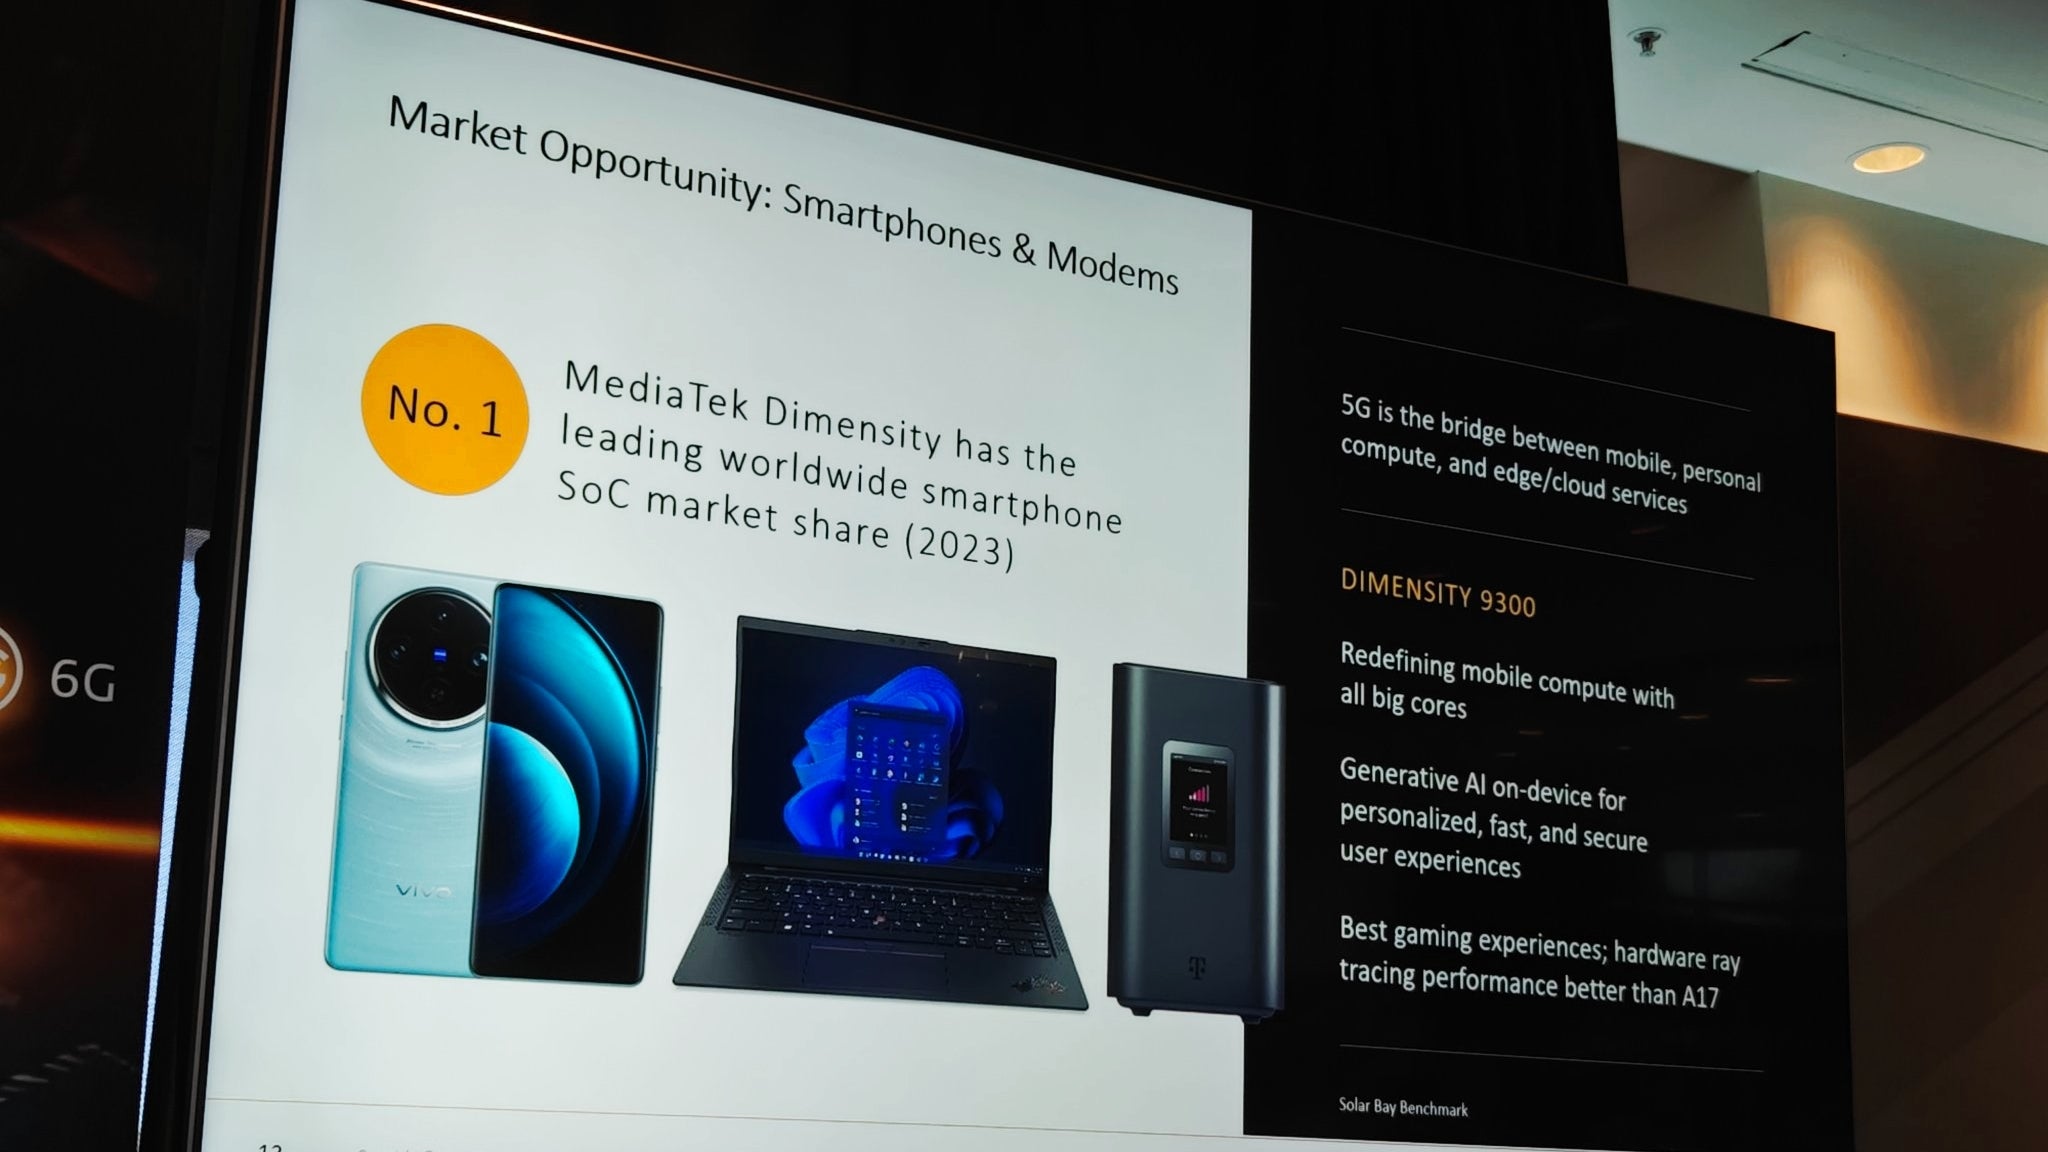 MediaTek has been the leading smartphone SoC vendor in the world for a while now. - The most powerful phone in the US - no longer iPhone or Galaxy? MediaTek enters the United States!